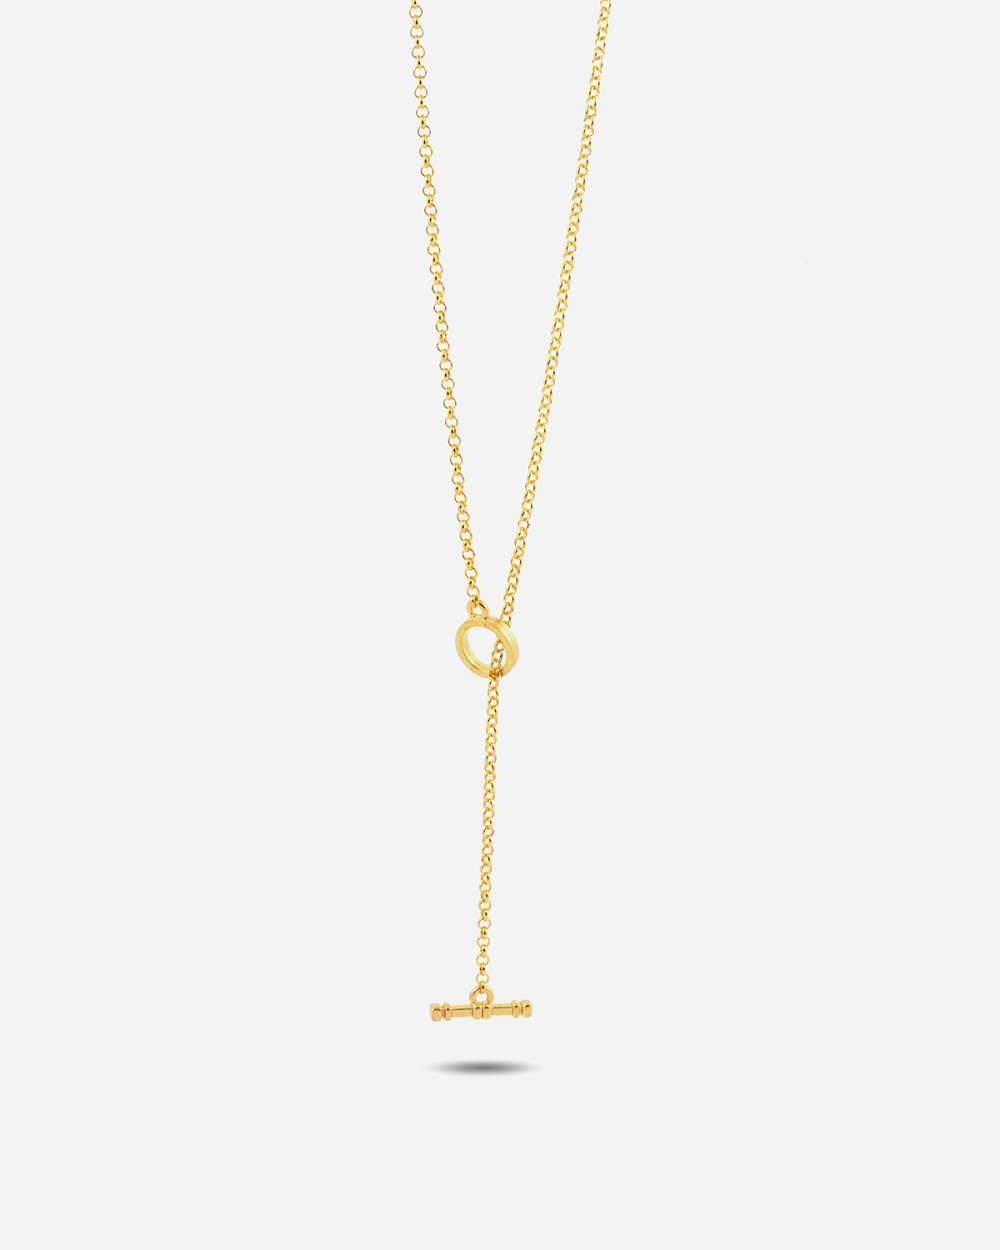 YELLOW GOLD ROLO 300 WITH T-BAR NECKLACE - 70